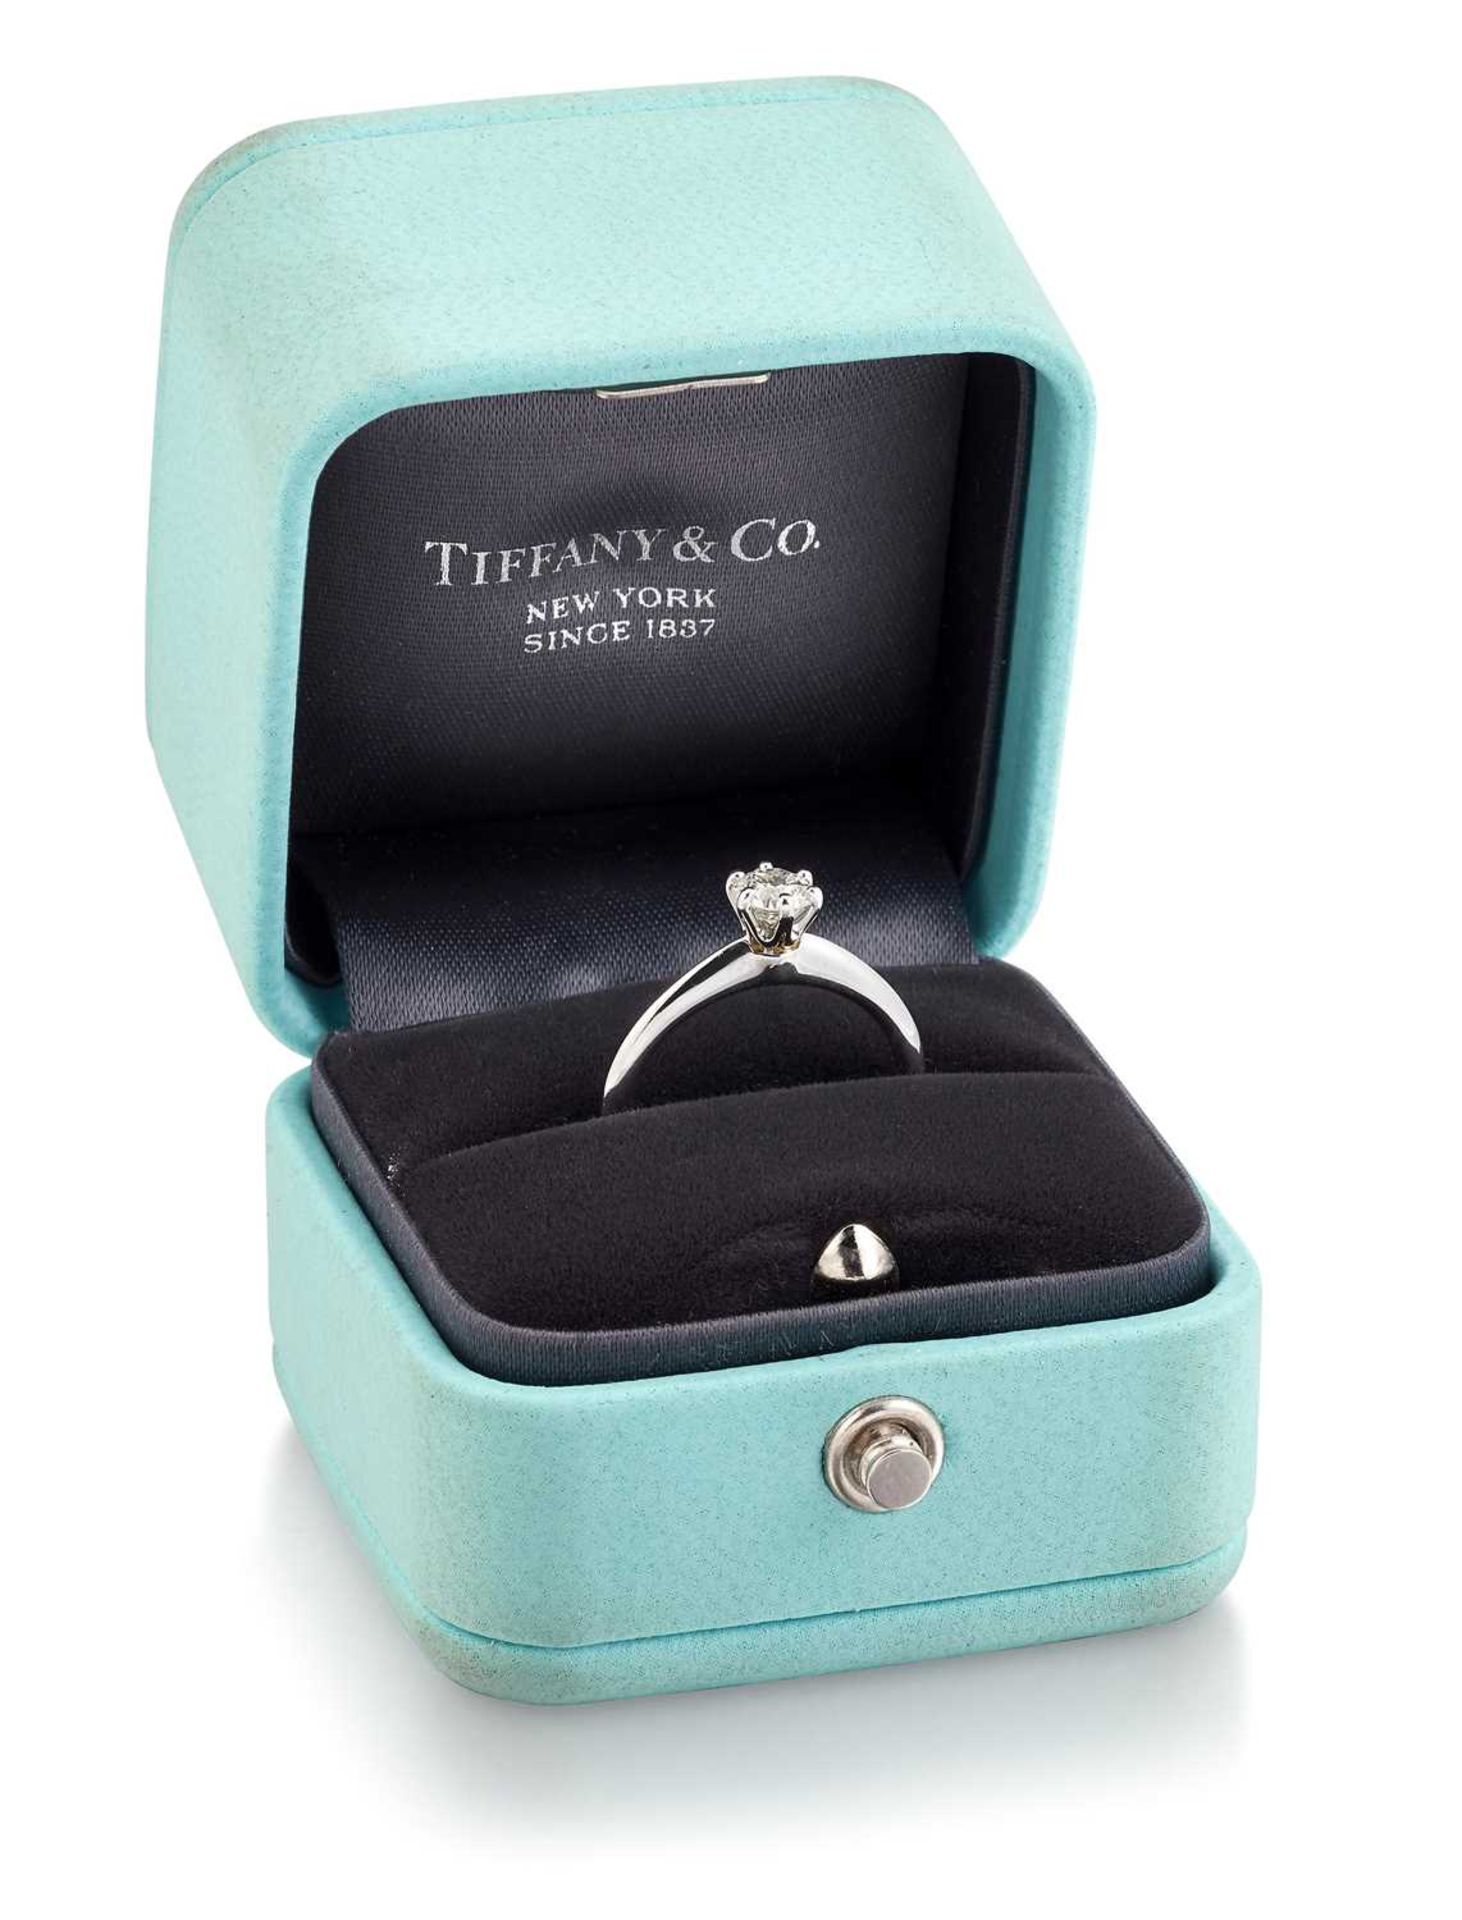 TIFFANY & CO - AN 18 CARAT WHITE GOLD SOLITAIRE DIAMOND RING - Image 2 of 2